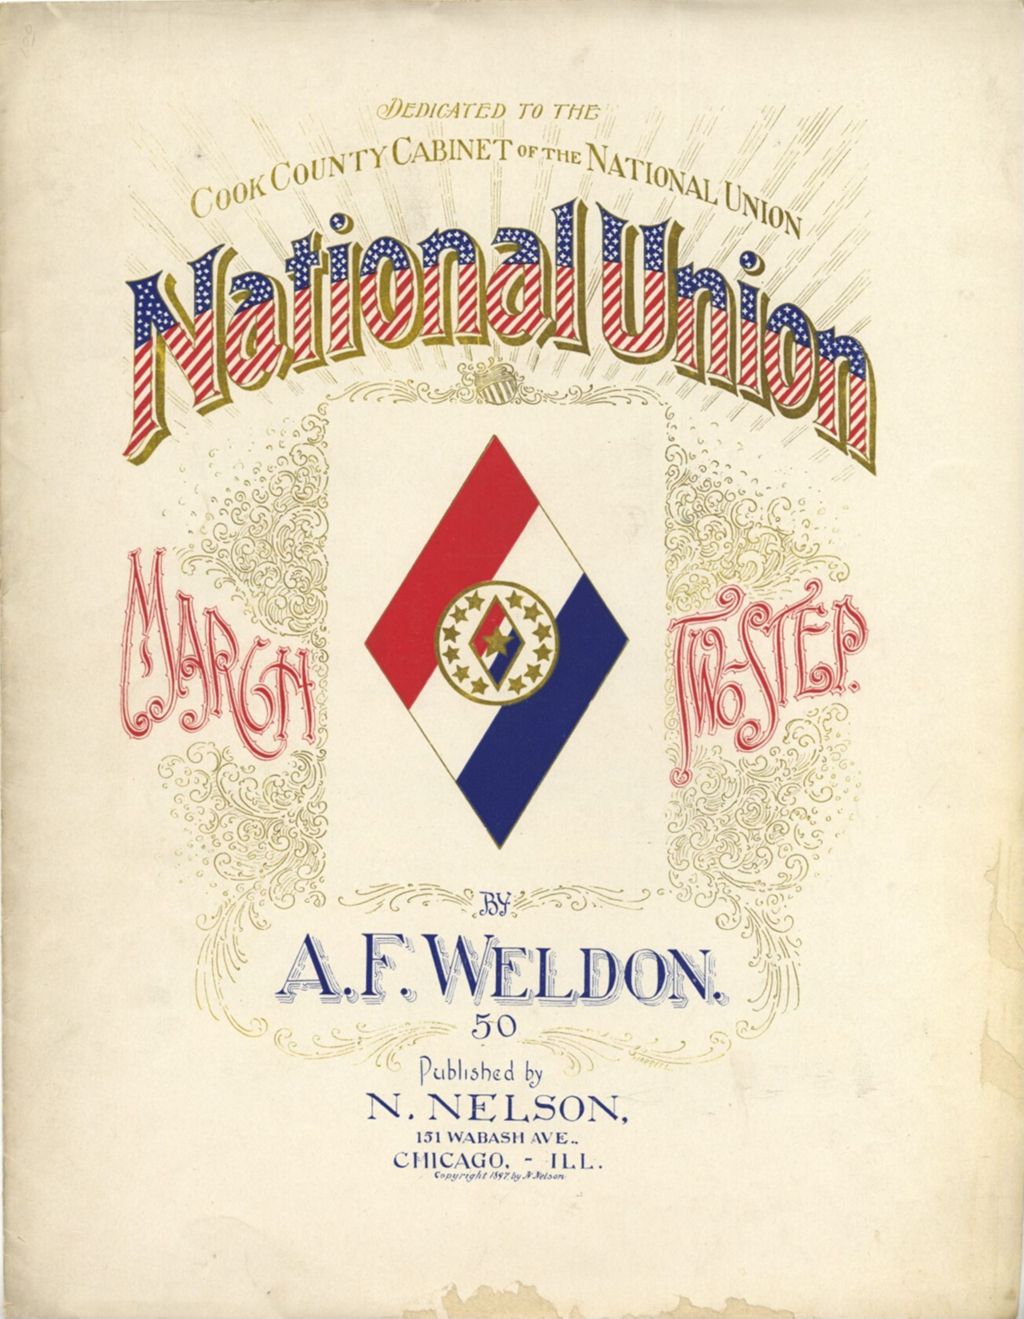 Miniature of National Union (March Two-Step)